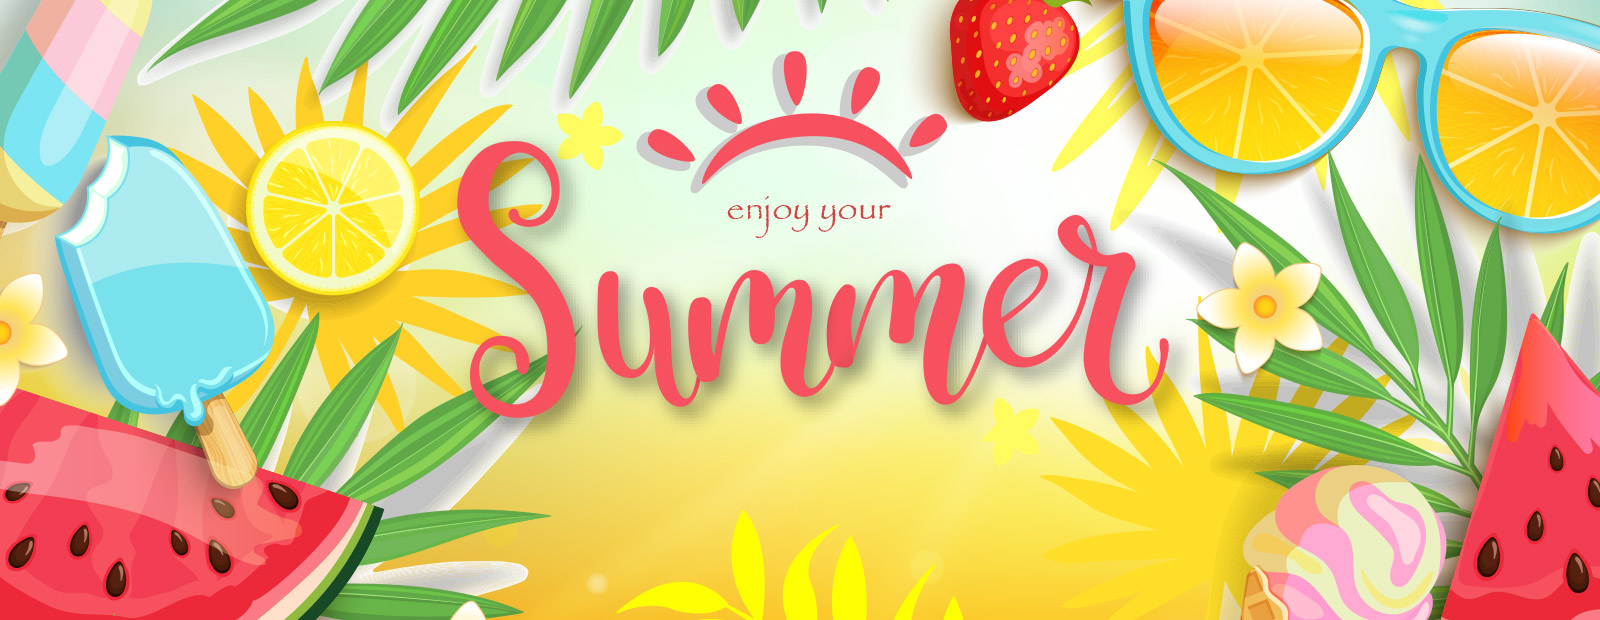 palm trees, orange slices and popsicles with text, enjoy your summer